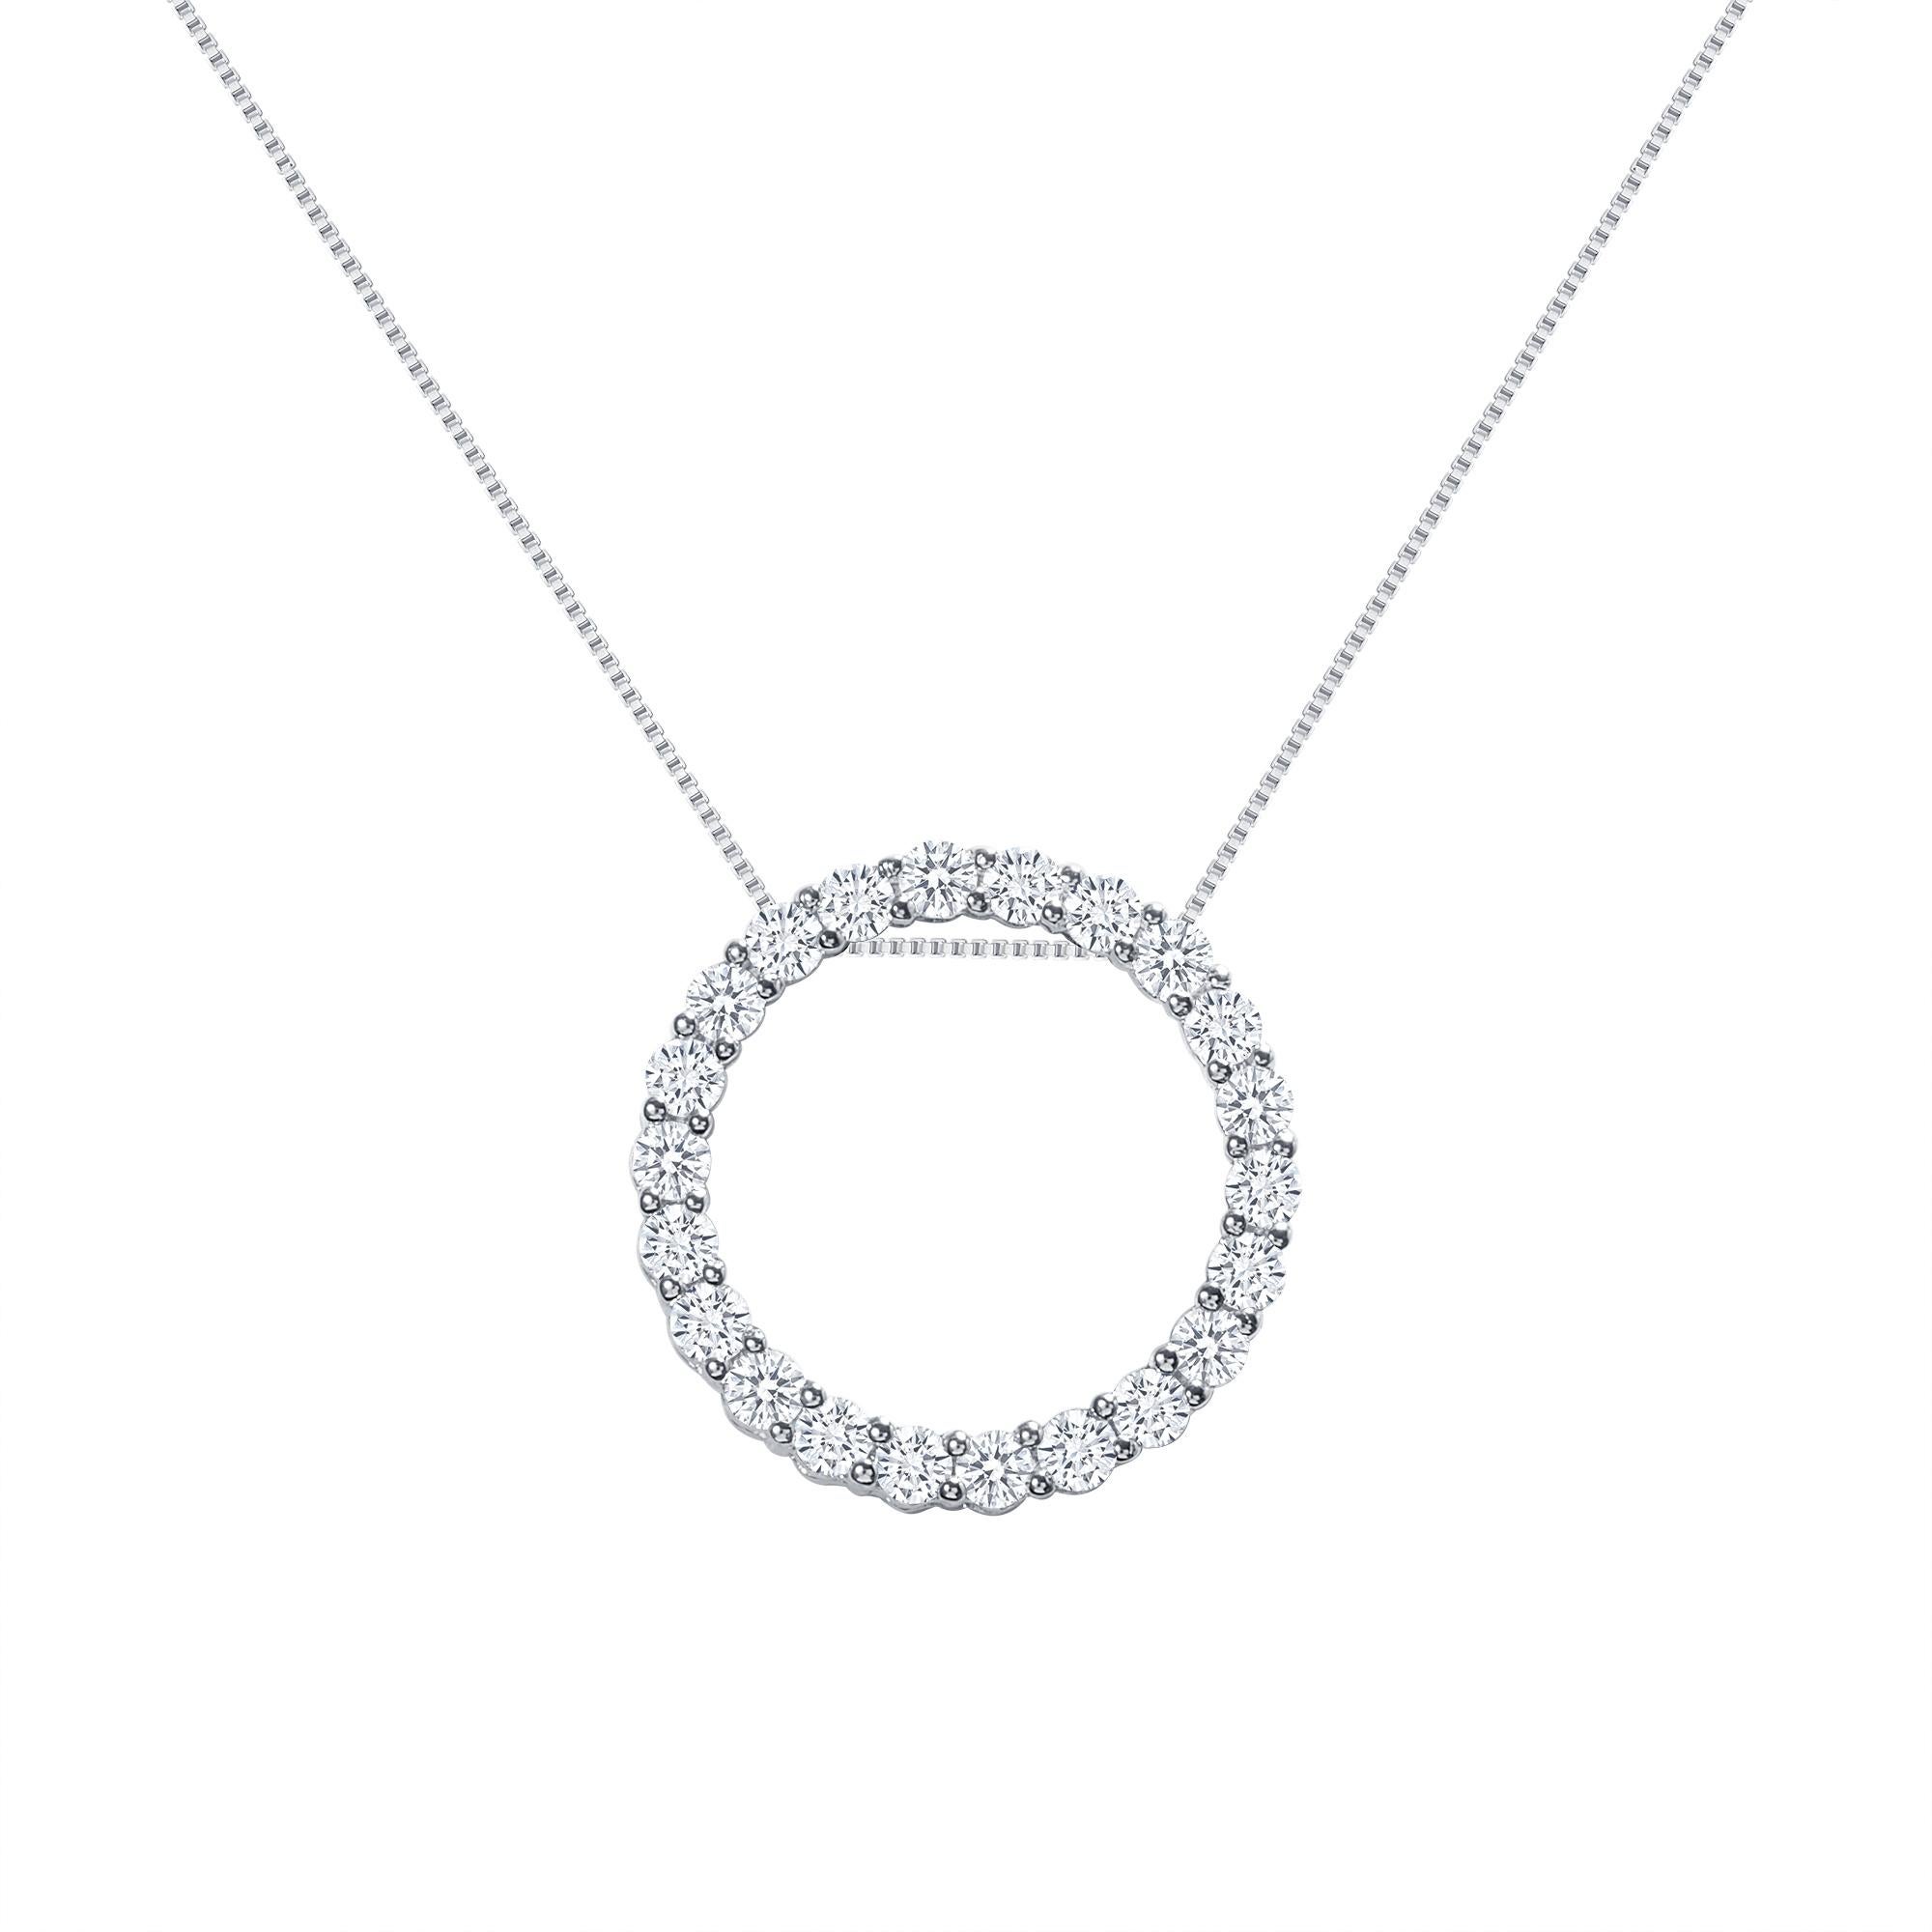 necklace with circle in middle